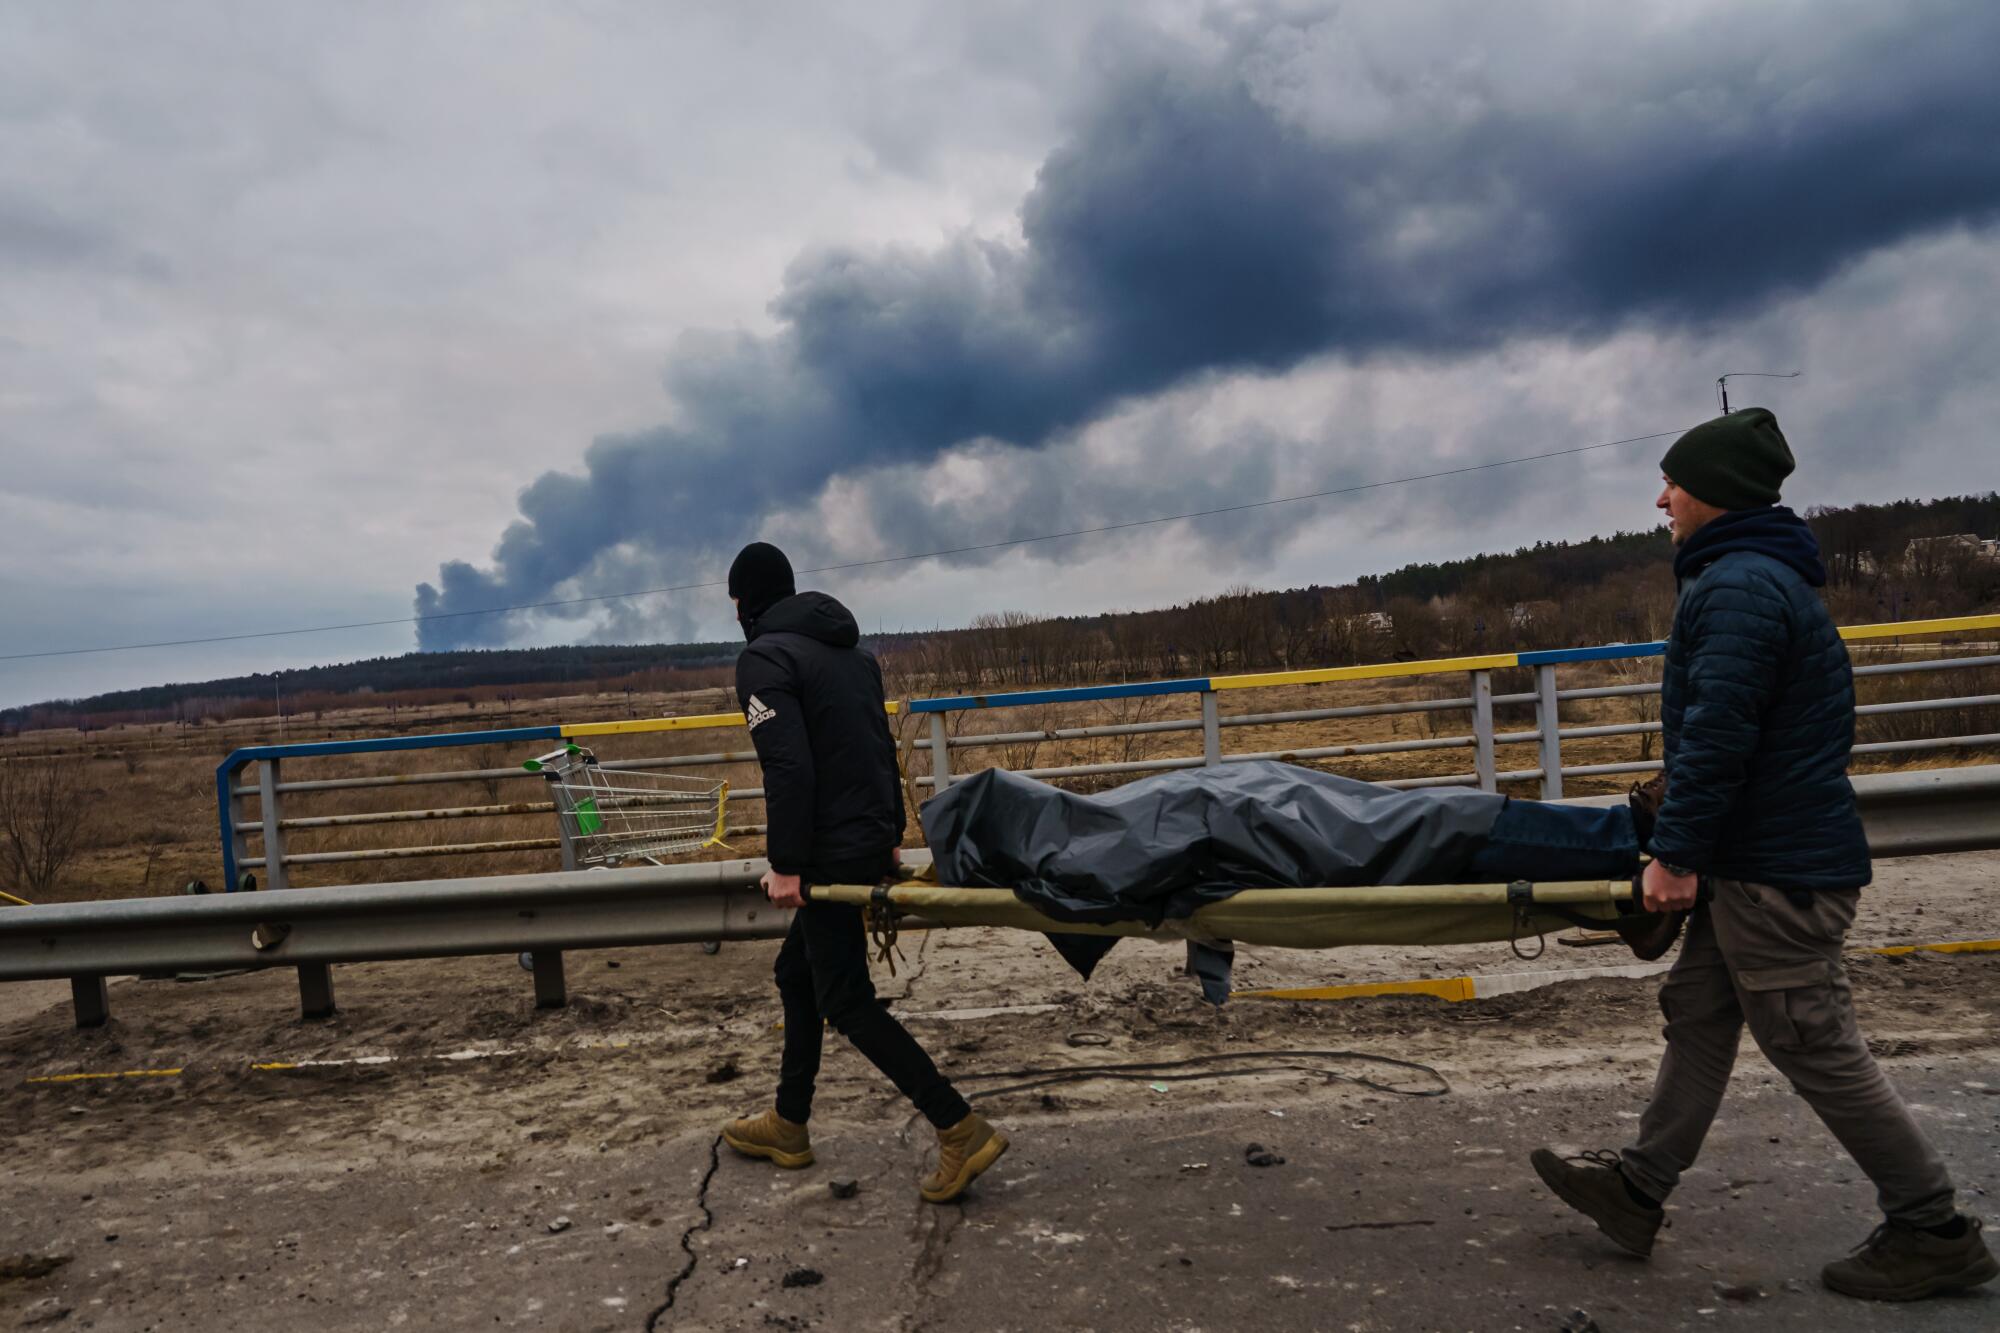 Two people carry a stretcher with a body as smoke rises in the distance.